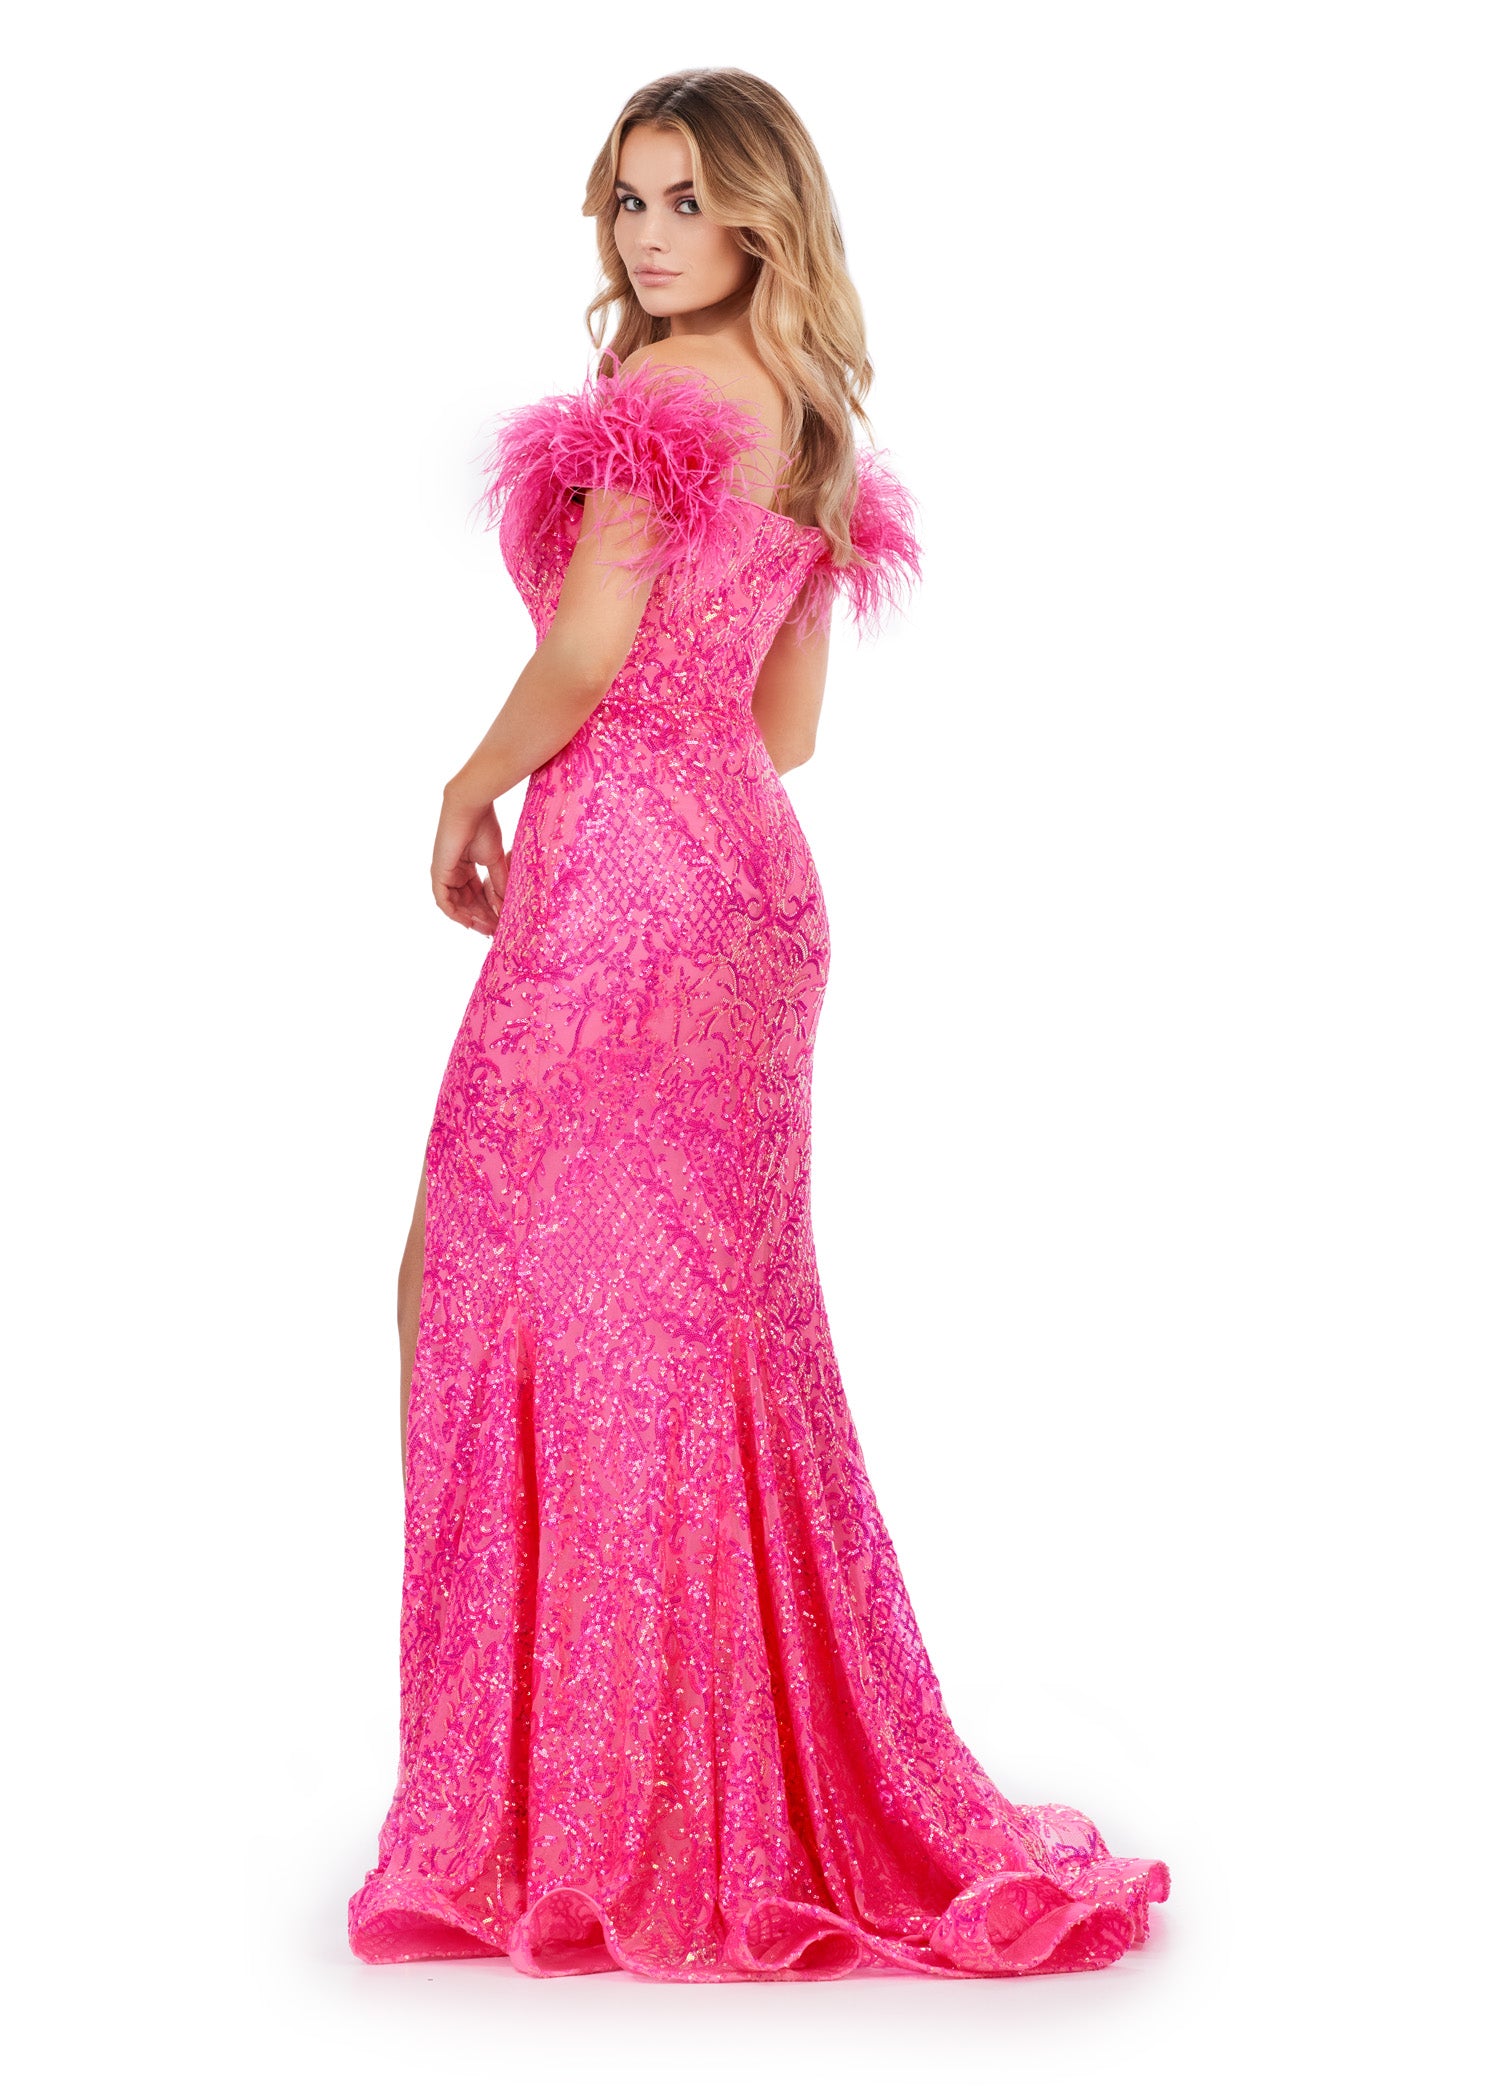 Elevate your prom look with the stunning Ashley Lauren 11463 Long Sequin Mermaid Prom Dress. The off the shoulder design and feather embellishments add a touch of glamour, while the slit detail adds a touch of flirtiness. This dress is perfect for making a statement on your special night. Stand out in this off the shoulder stretch sequin gown. We are living for this sweetheart neckline and feather details.